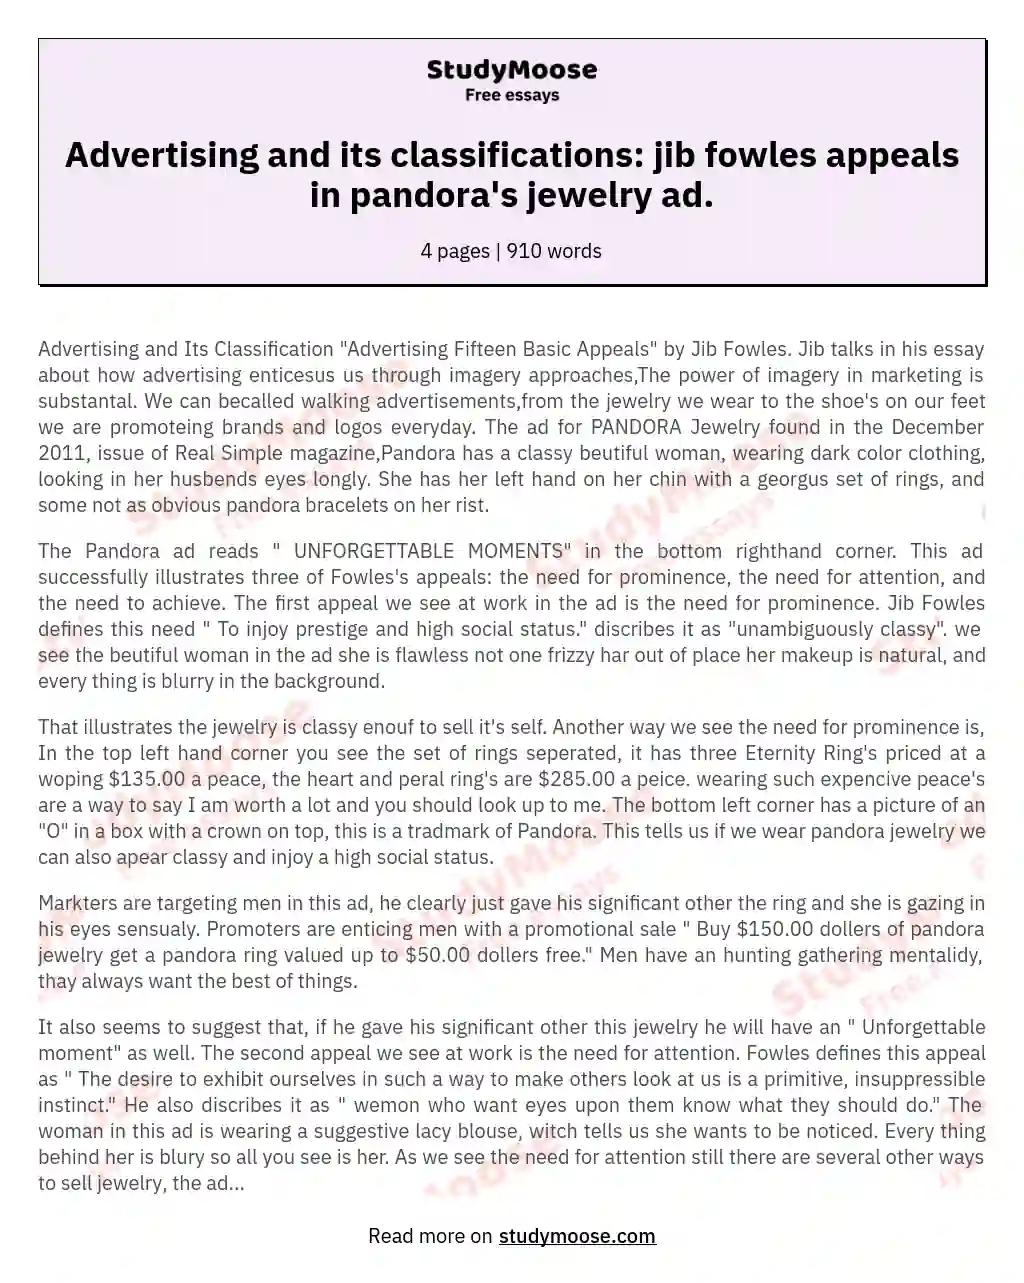 Advertising and its classifications: jib fowles appeals in pandora's jewelry ad. essay